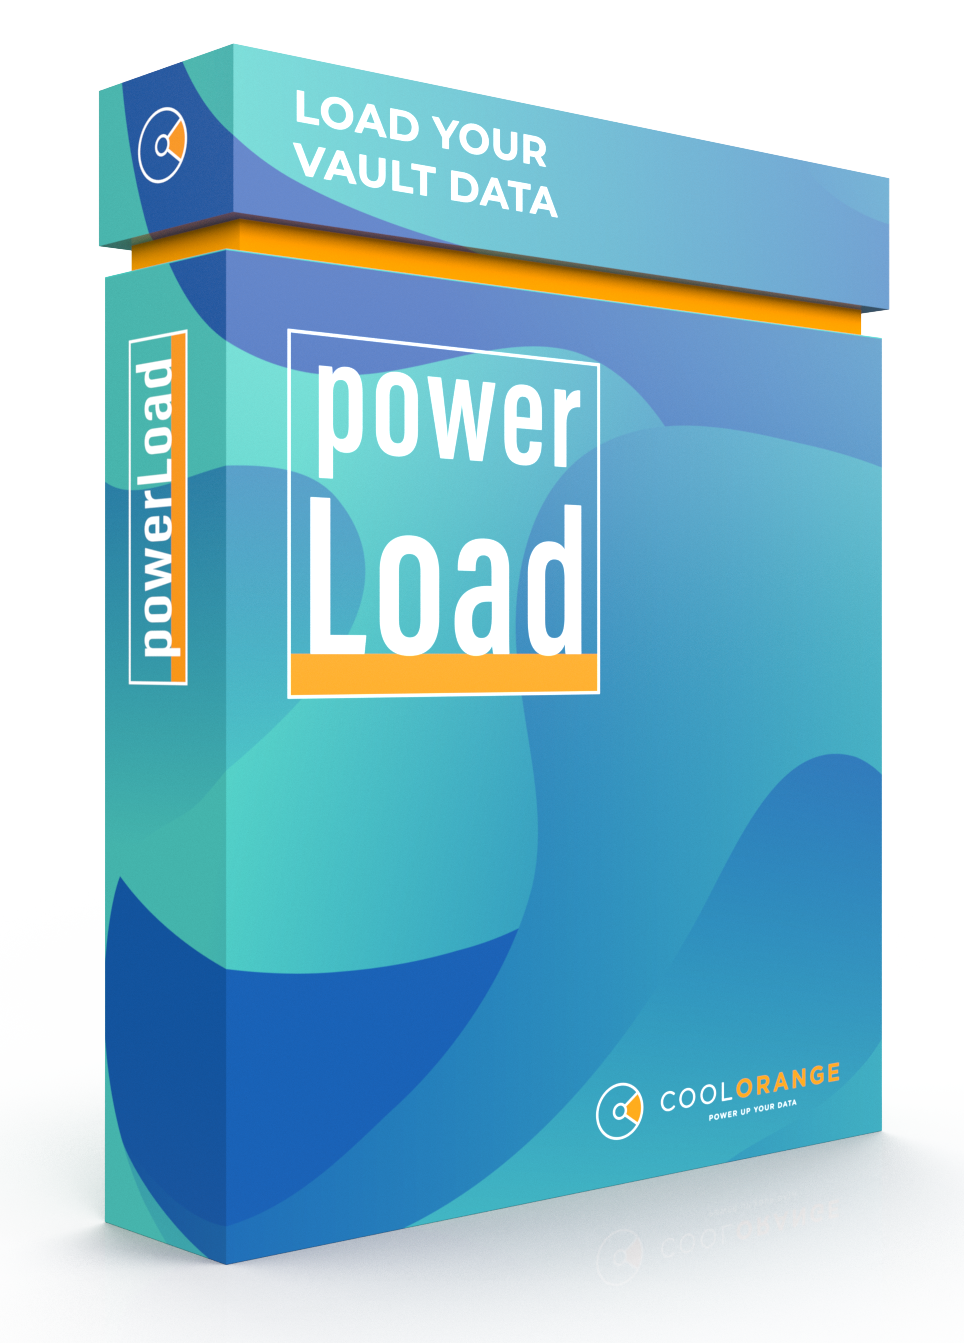 powerload can load data into autodesk vault